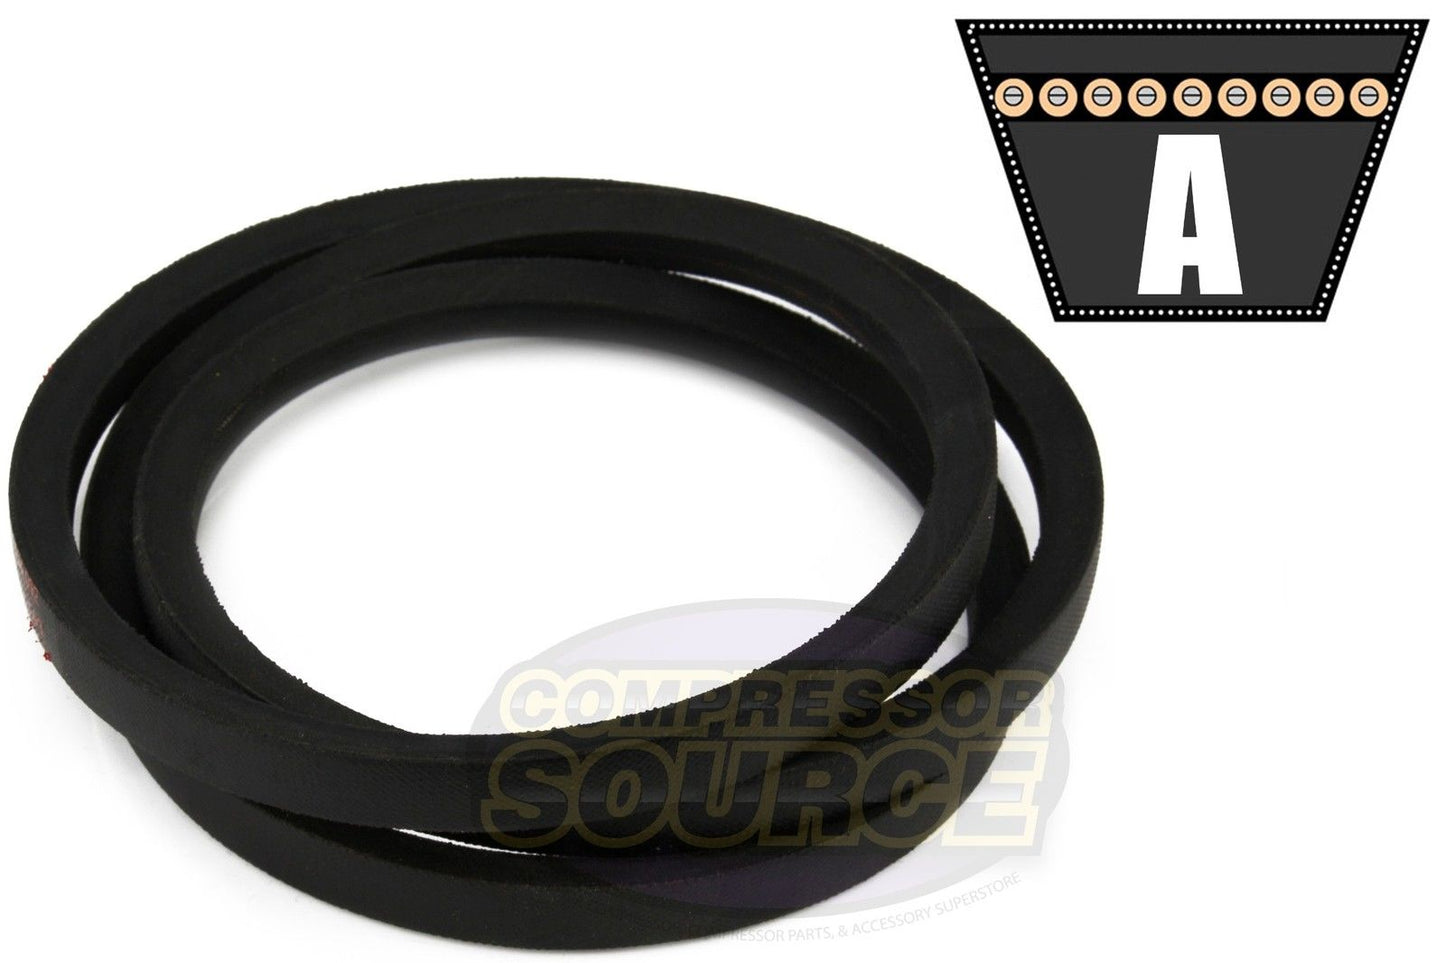 A53 1/2" x 55" V Belt 4L550 Replacement High Quality Industrial & Lawn Mower